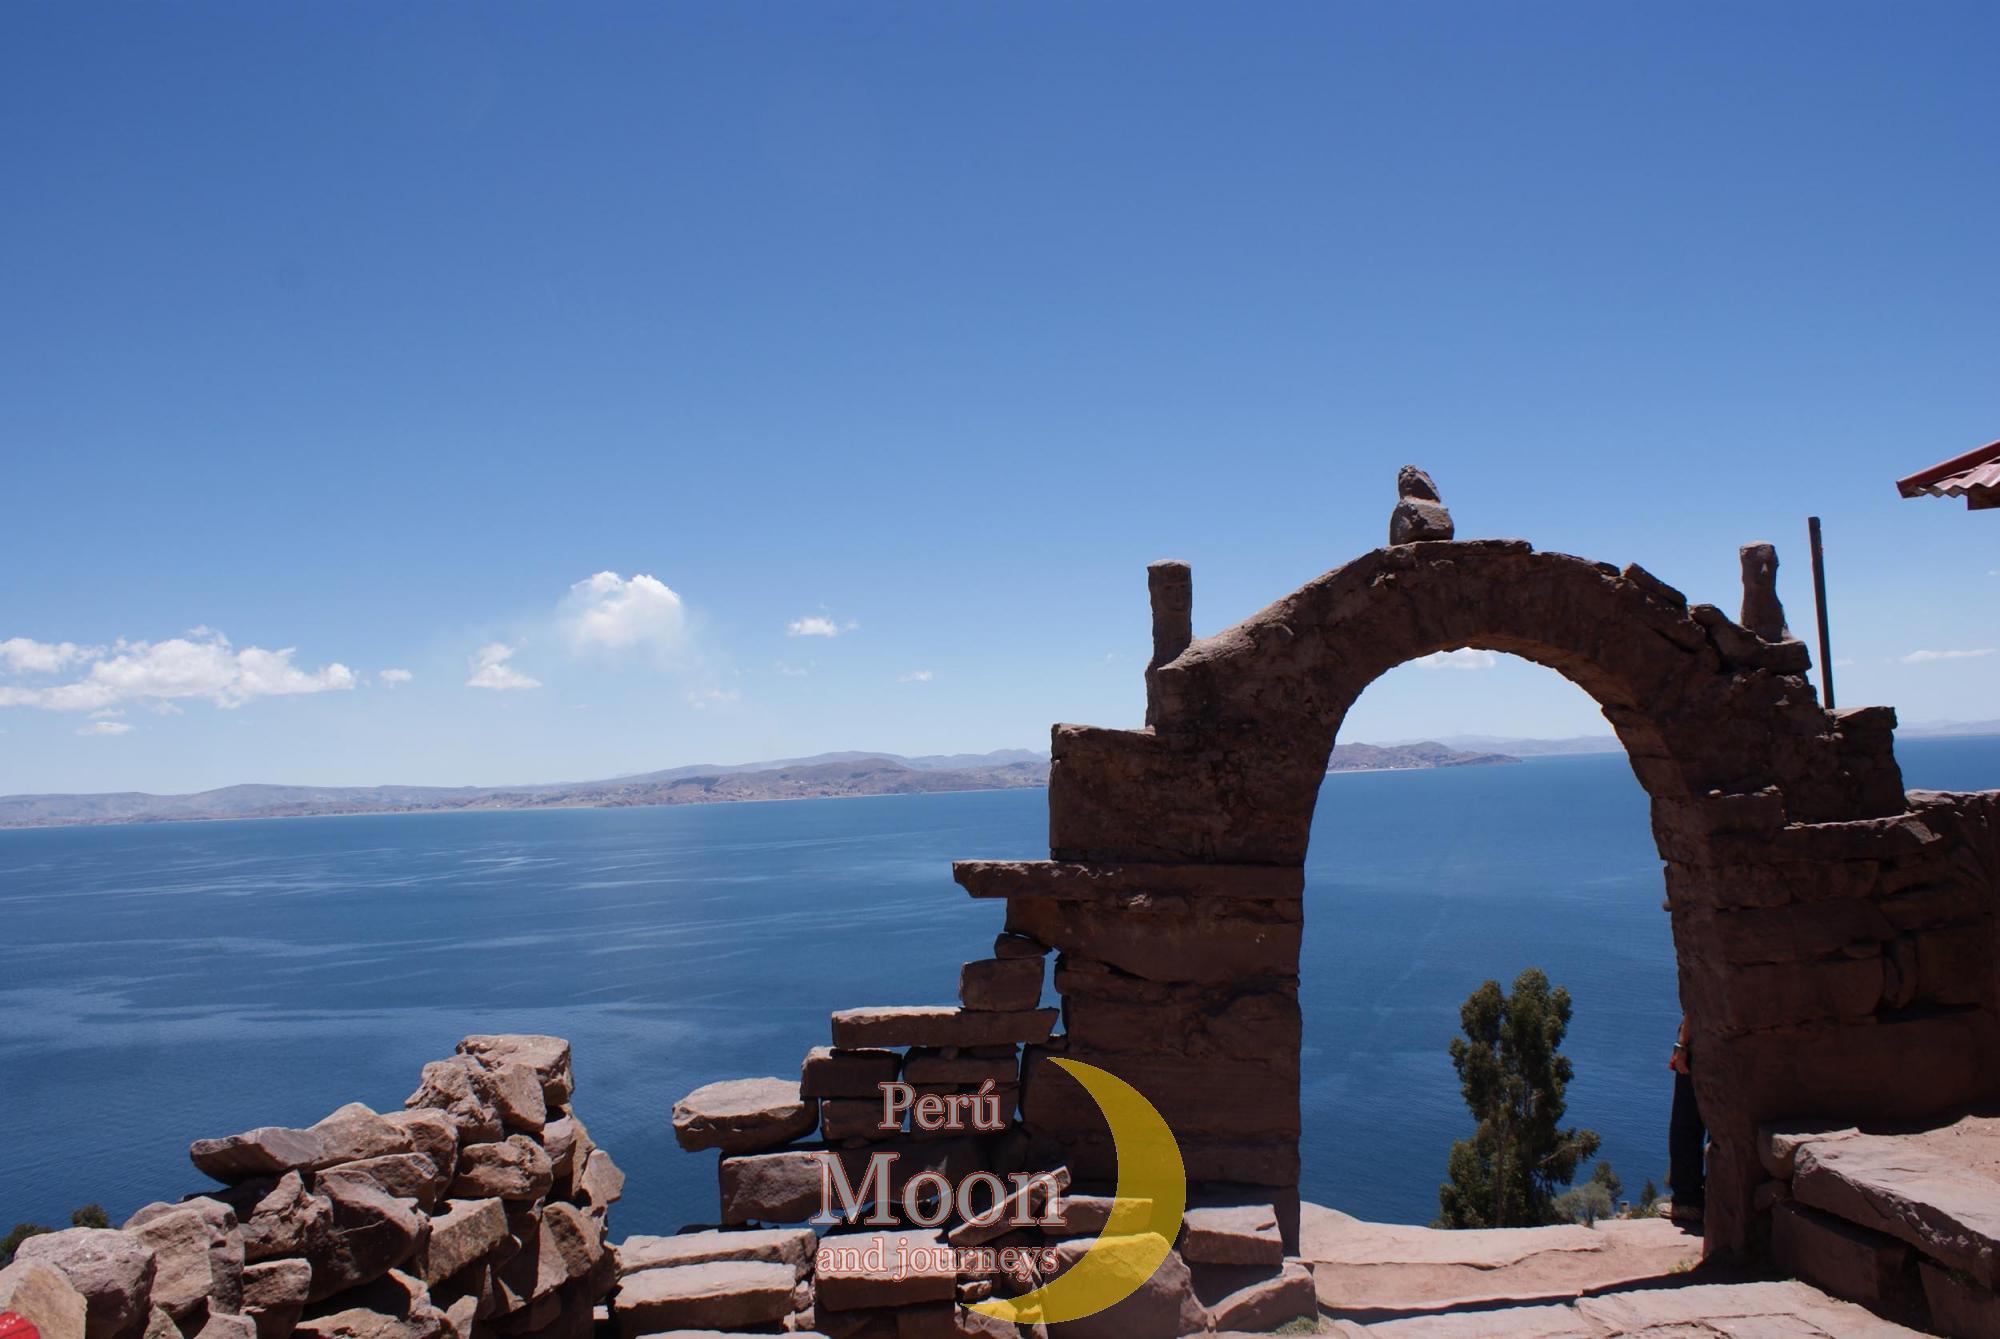 Door of the island of Taquile on Lake Titicaca